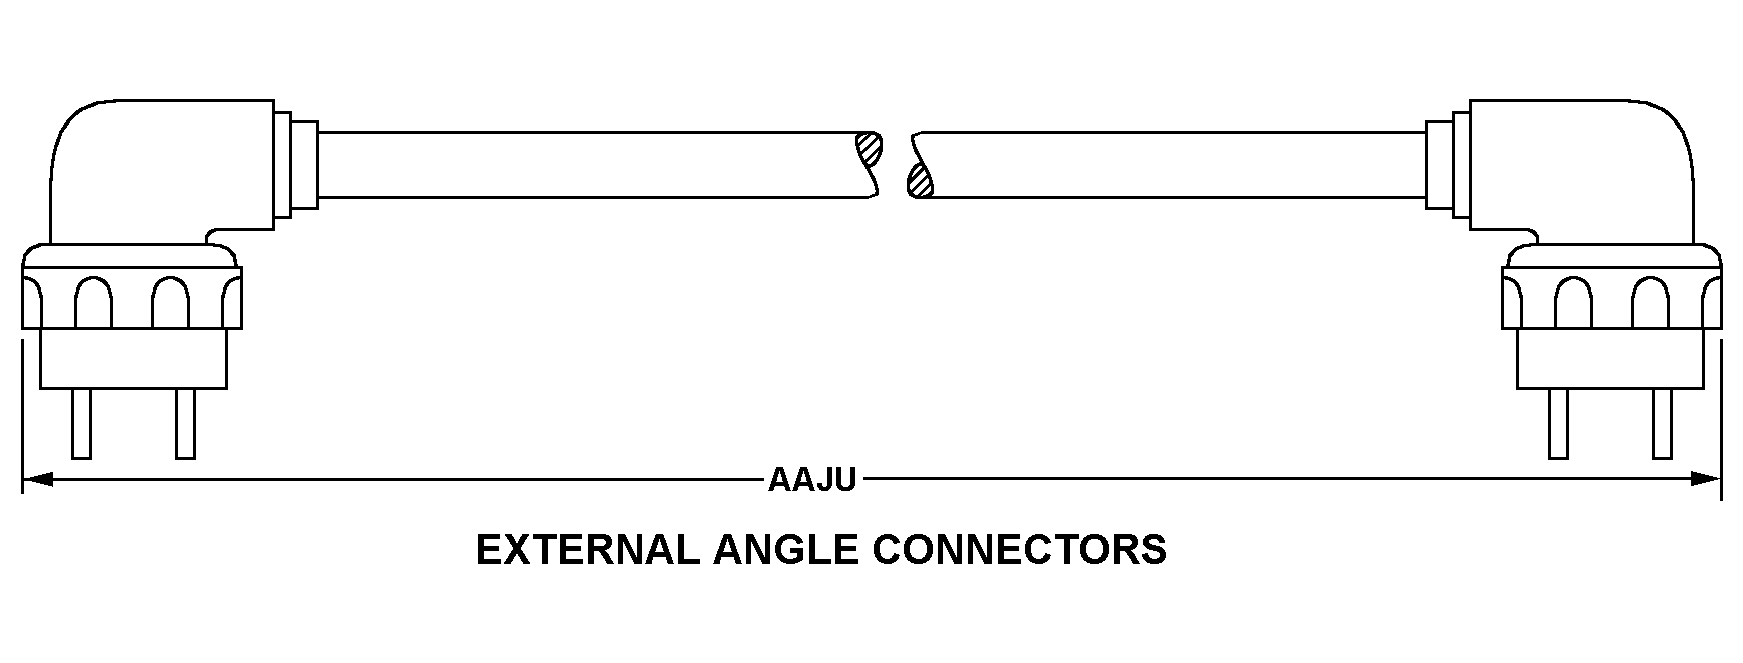 EXTERNAL ANGLE CONNECTORS style nsn 6150-01-270-6225